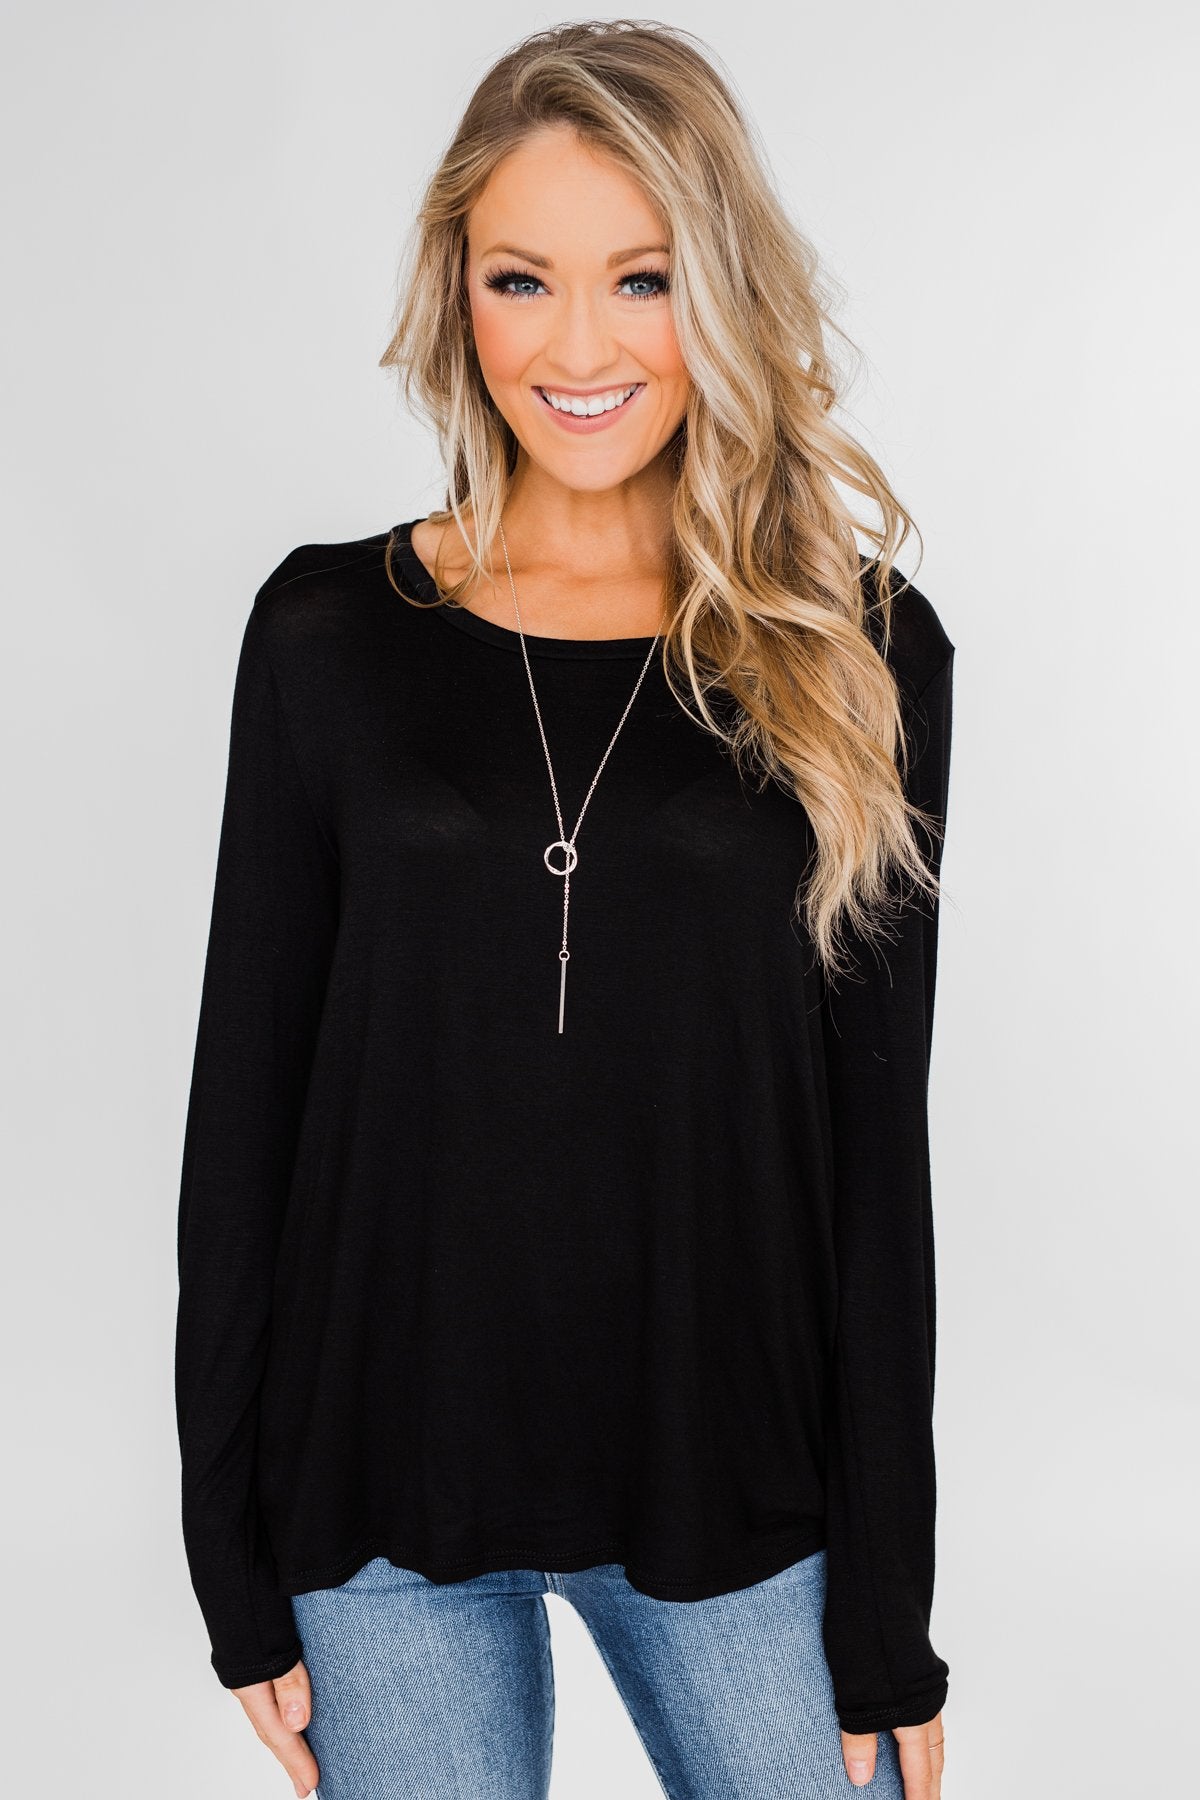 Cut Out Back Long Sleeve Top- Black